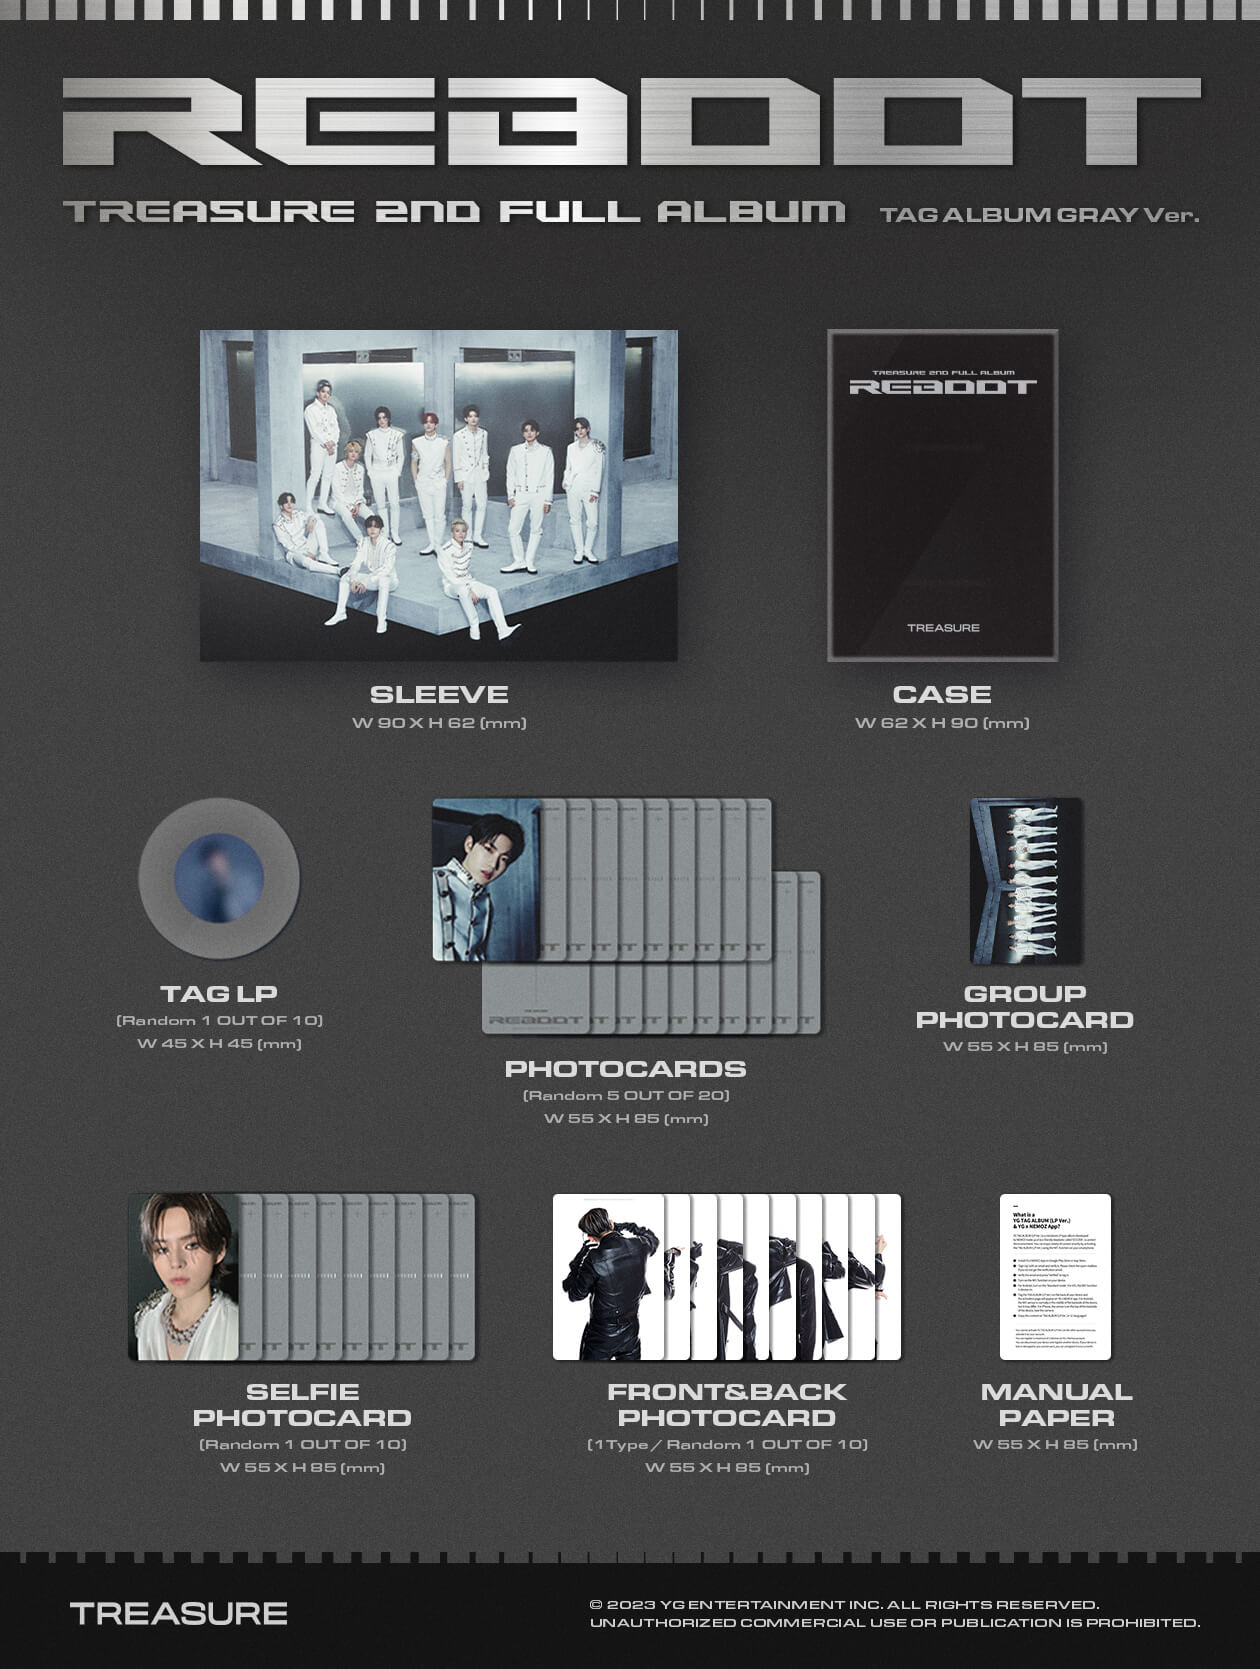 TREASURE REBOOT YG TAG Album GRAY Ver. Inclusions Sleeve Case TAG LP Photocards Group Photocard Selfie Photocard Front&Back Photocard Manual Paper